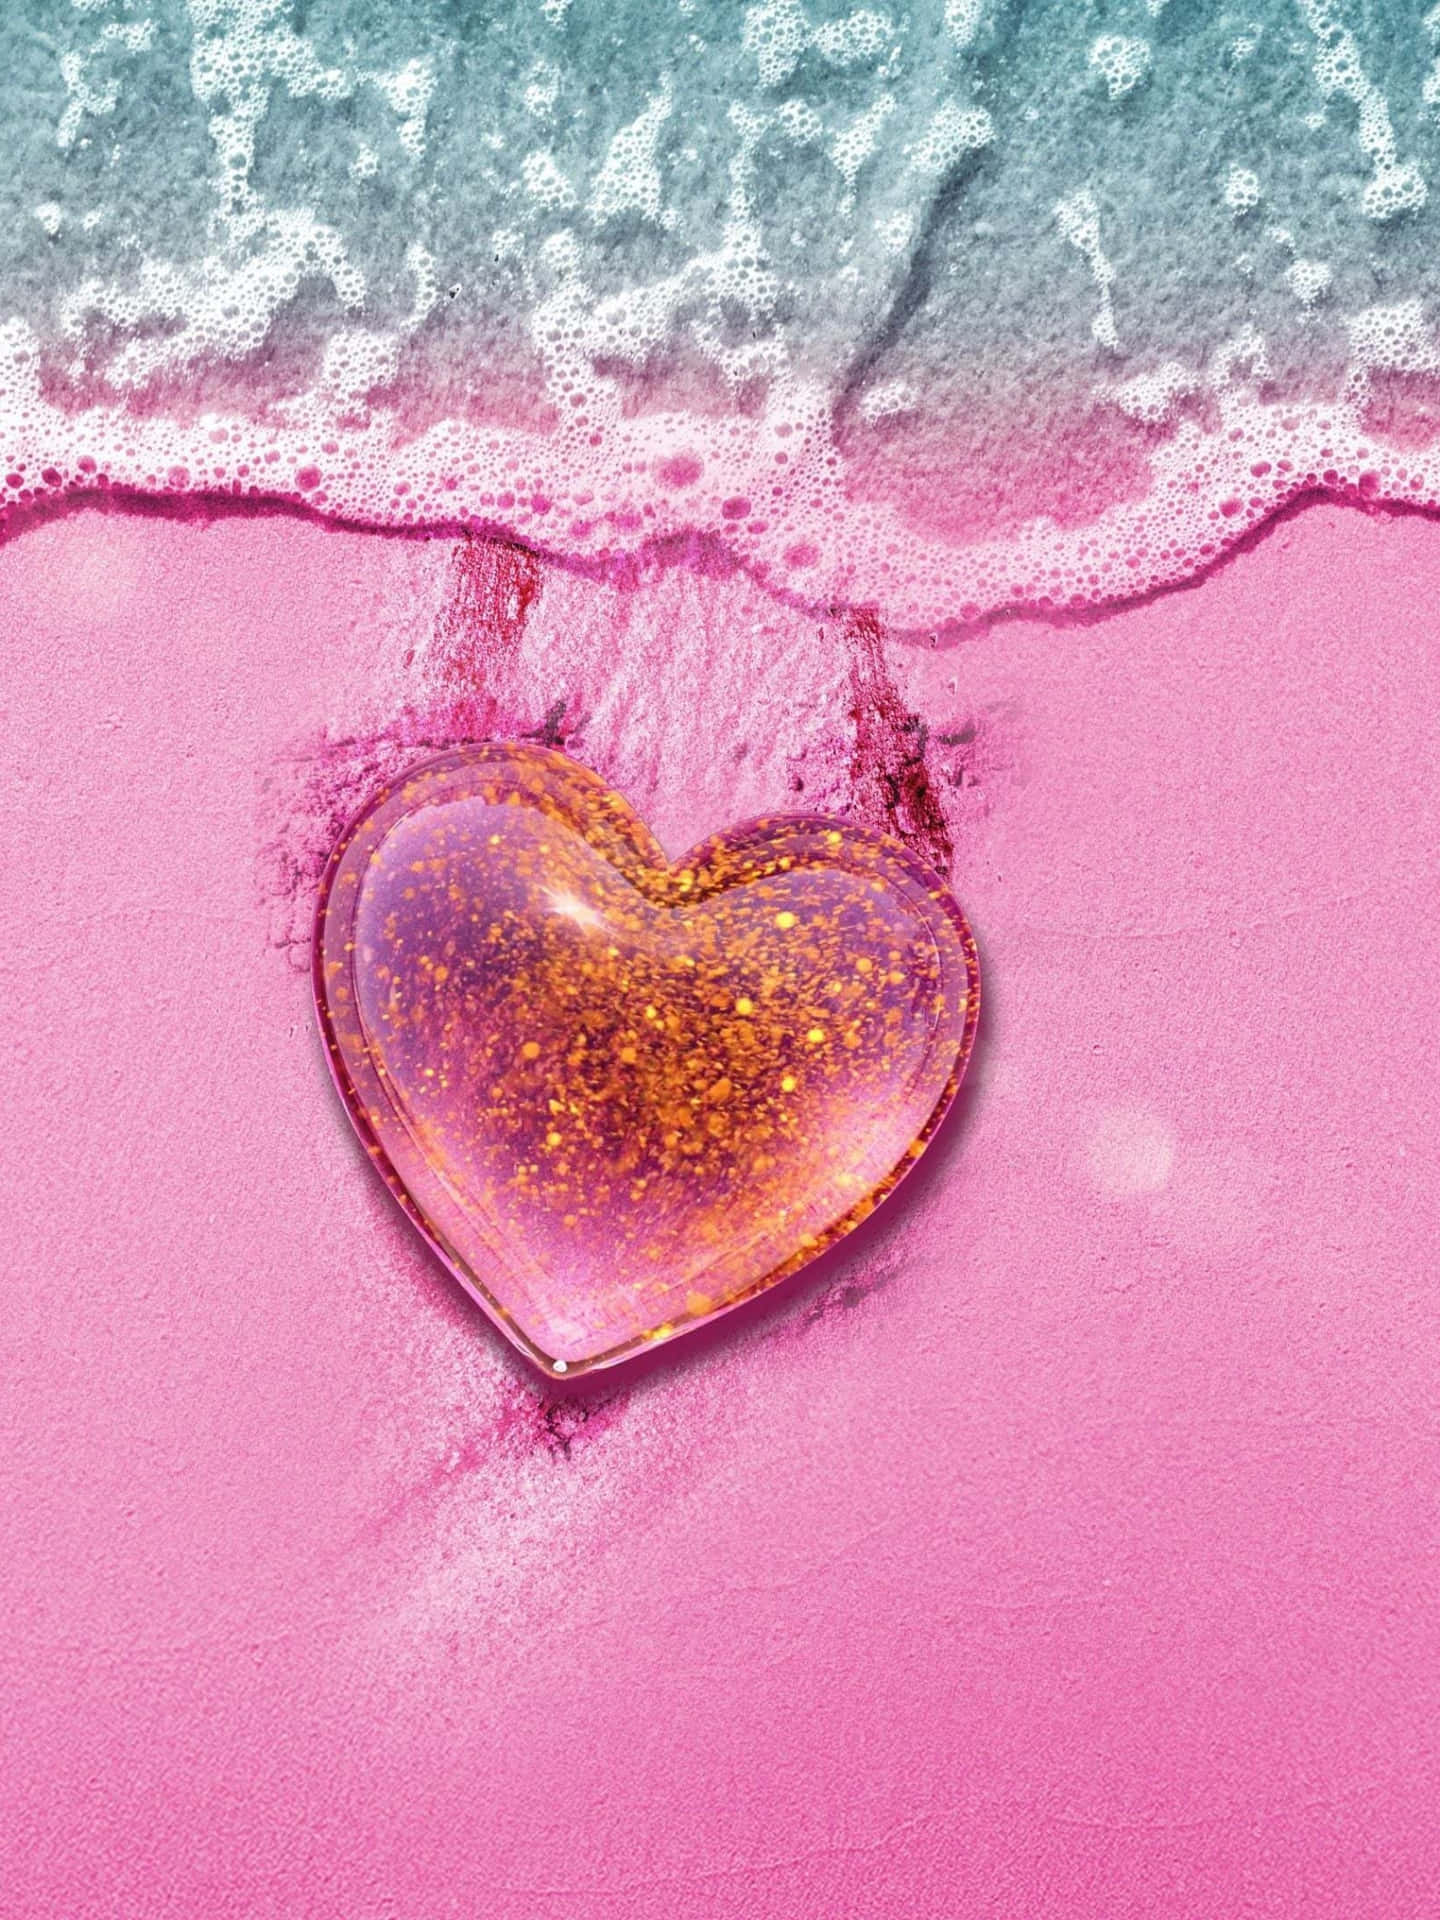 A beautiful background surrounded by glittering pink hearts. Wallpaper